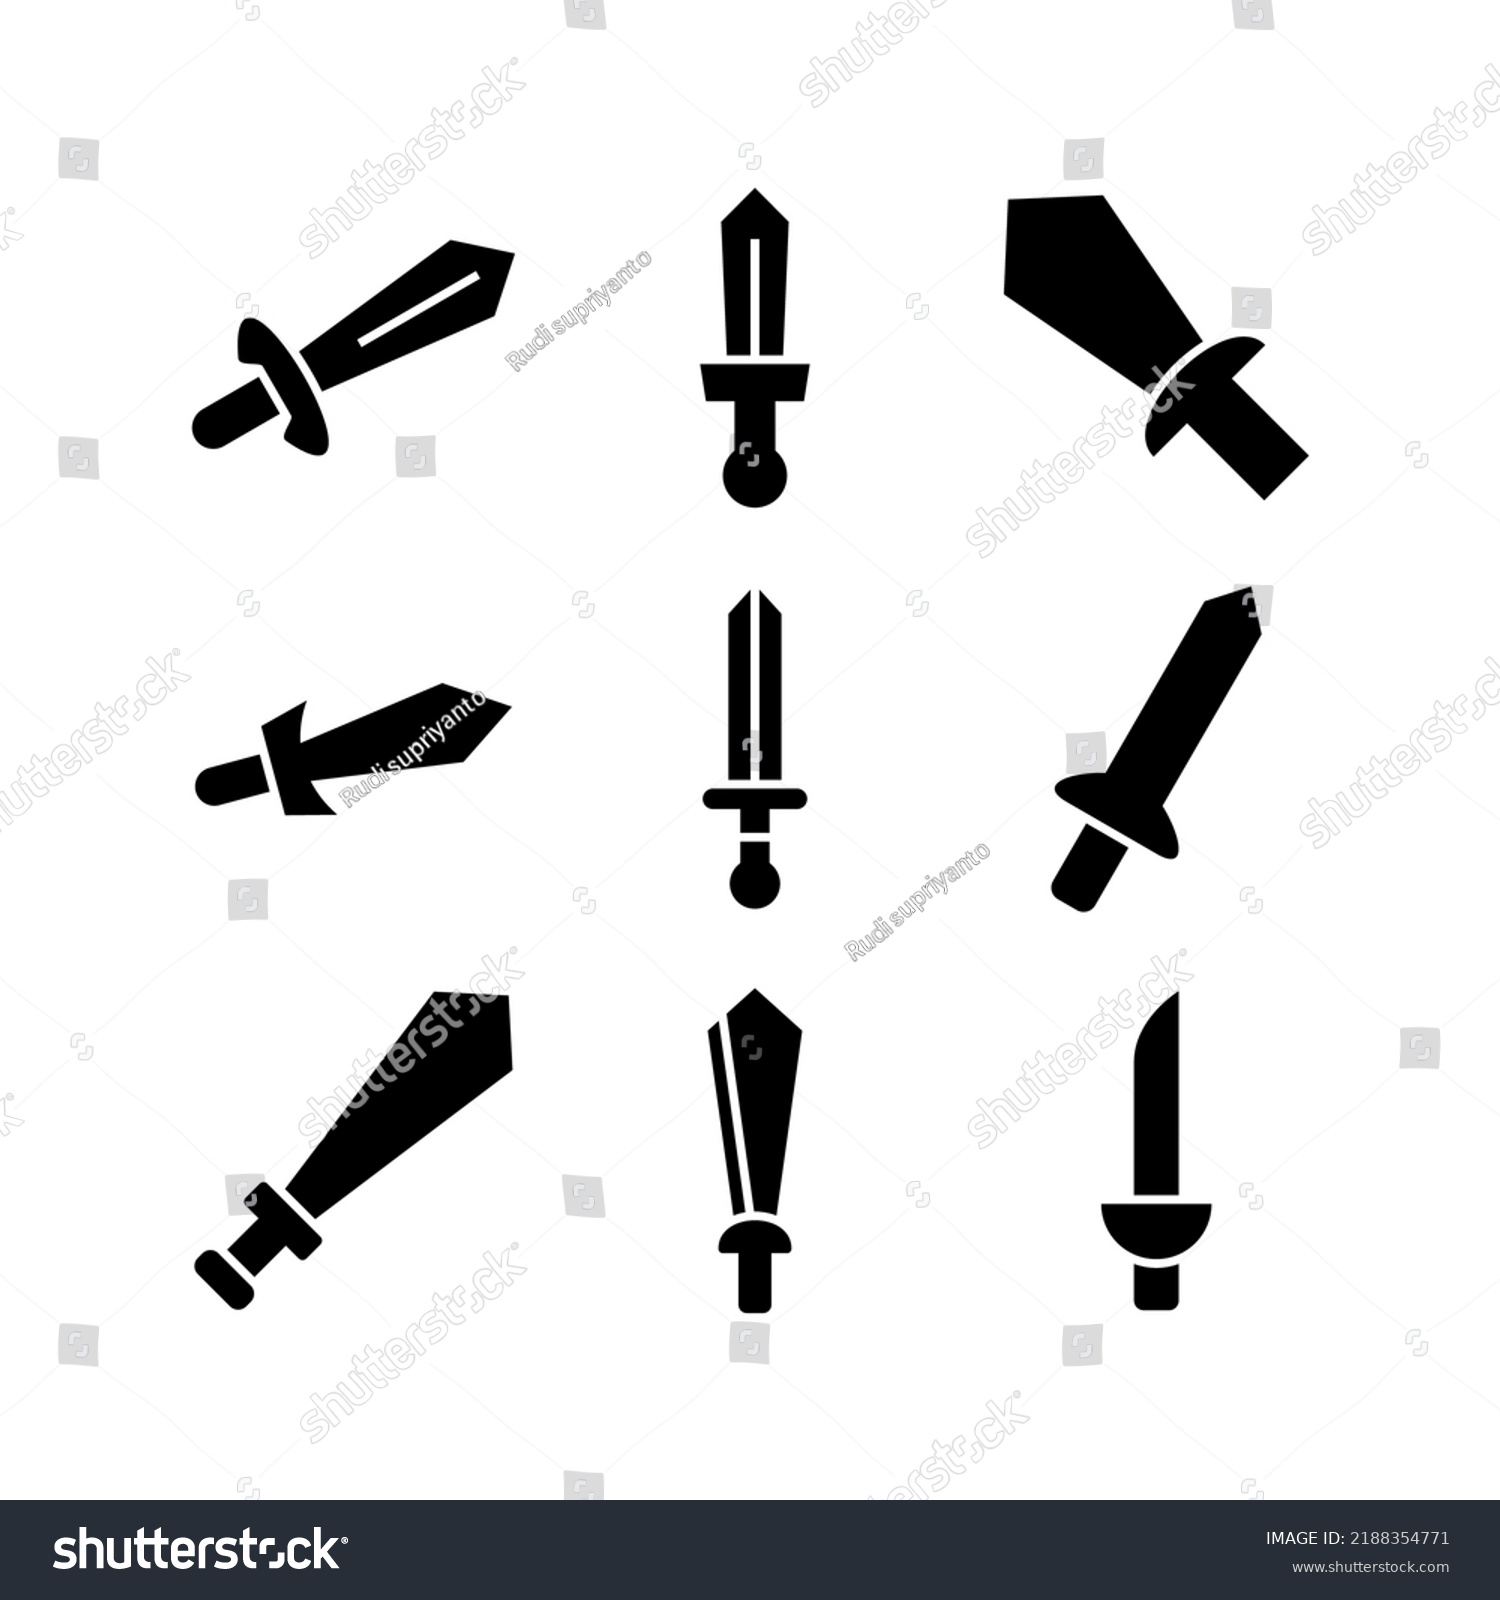 sword icon or logo isolated sign symbol vector illustration - high quality black style vector icons
 #2188354771